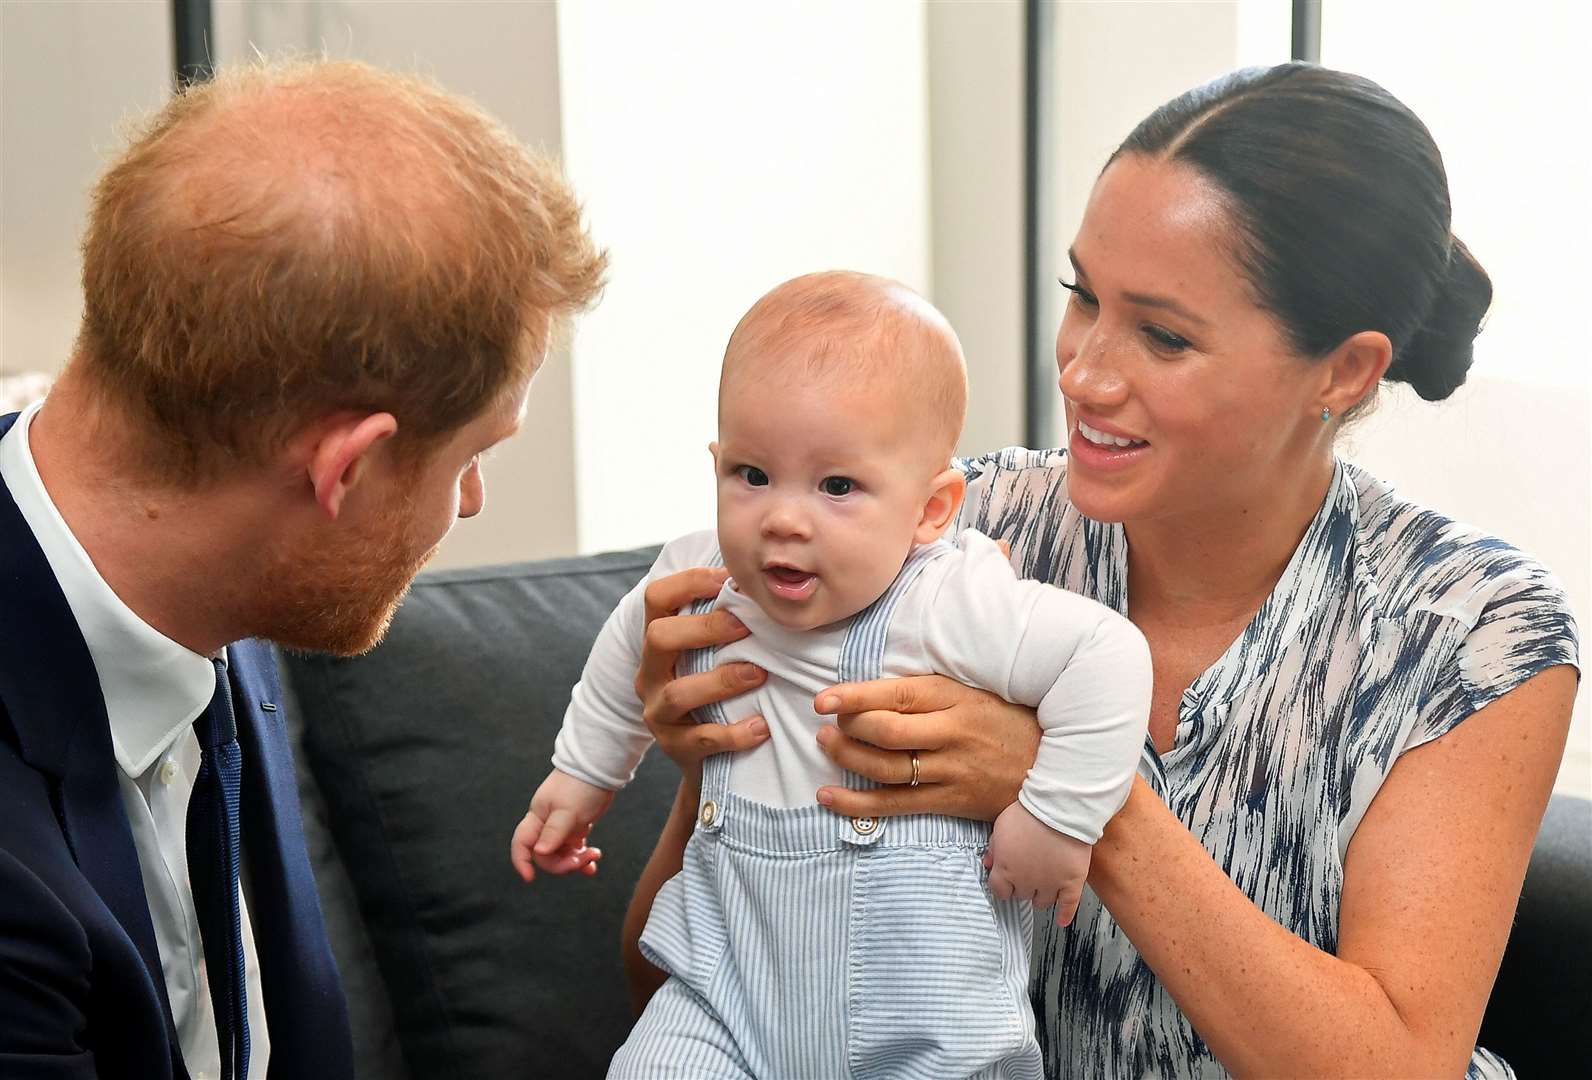 Harry and Meghan holding their son Archie during a meeting with Archbishop Desmond Tutu in 2019 (Toby Melville/PA)